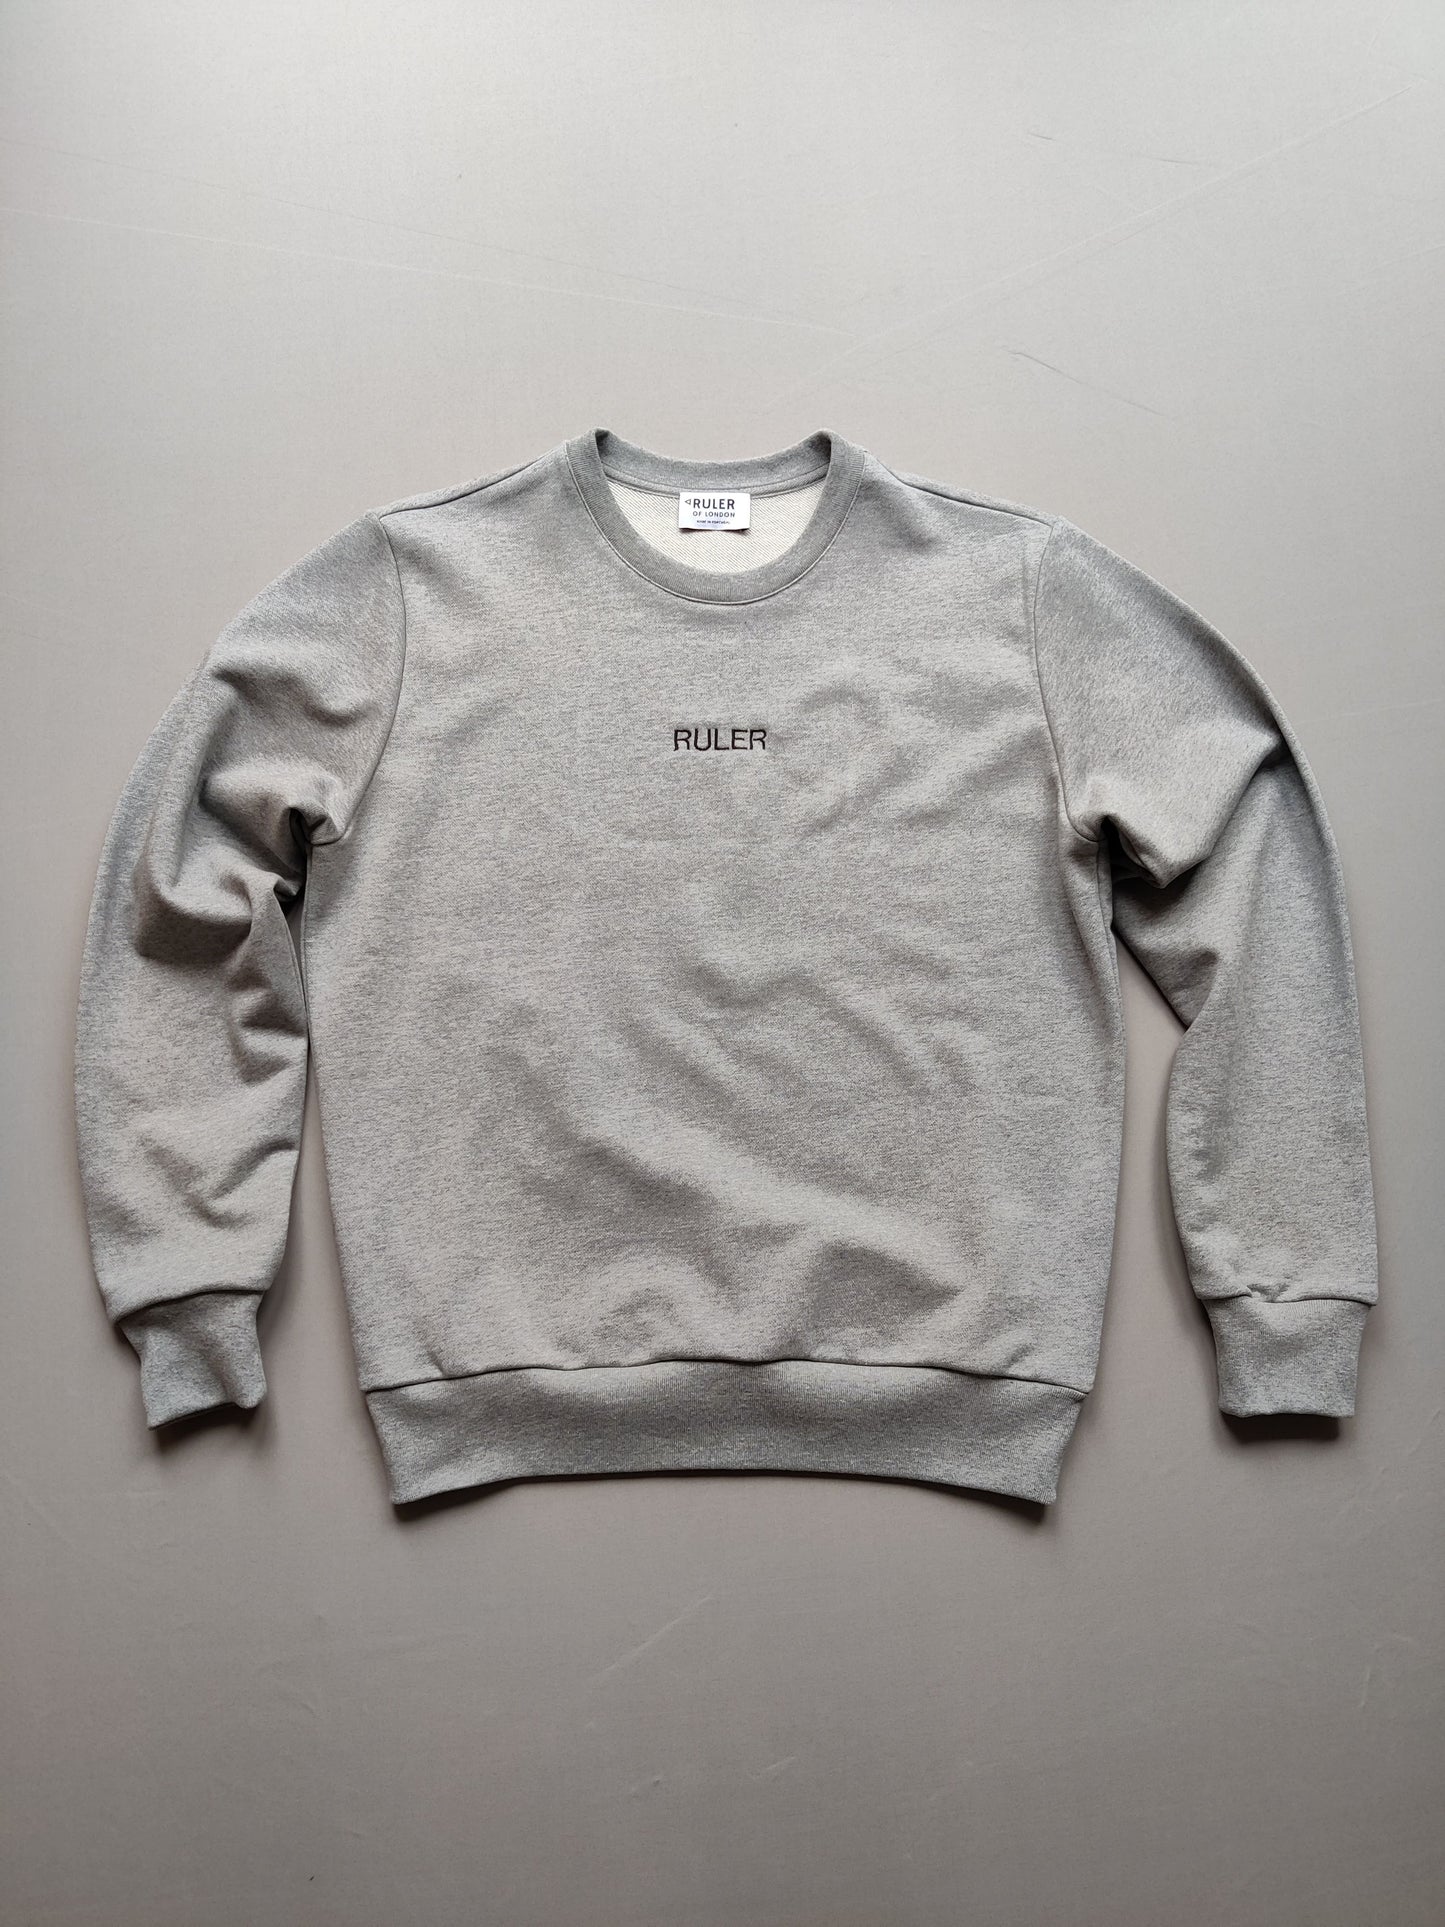 The Organic Sweatshirt with Ruler Embroidered Logo